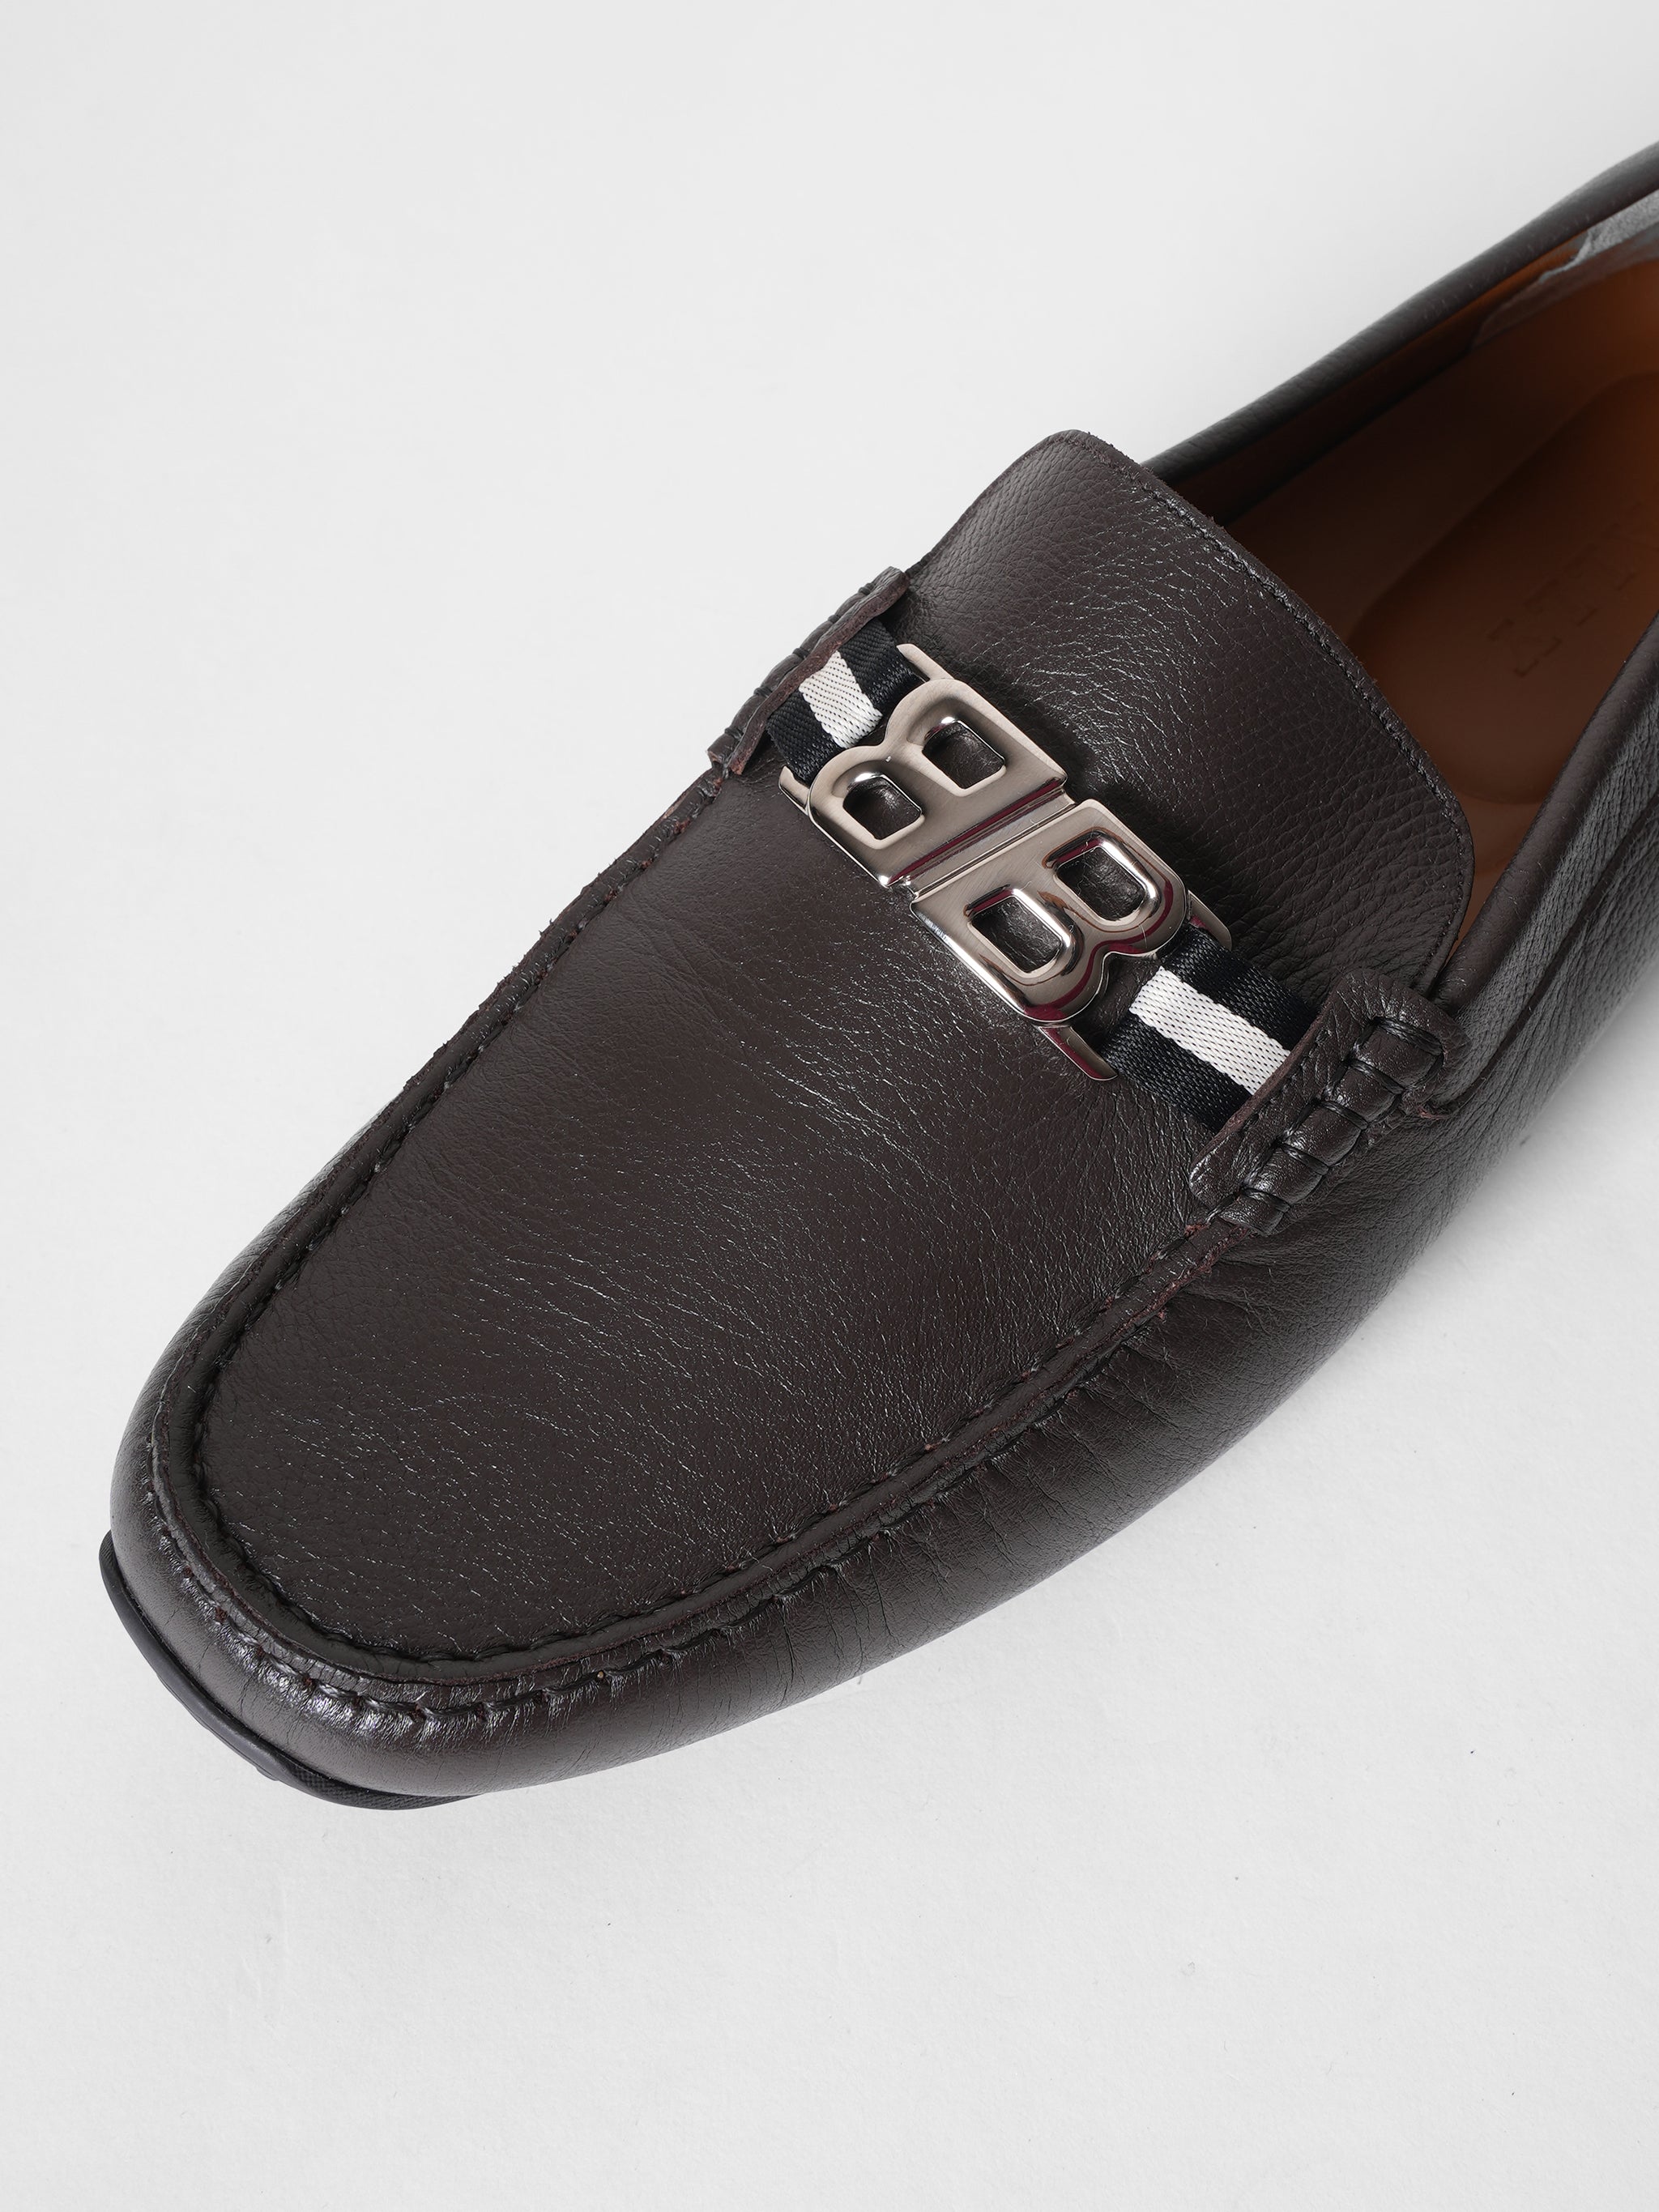 New Bally Brown Loafers